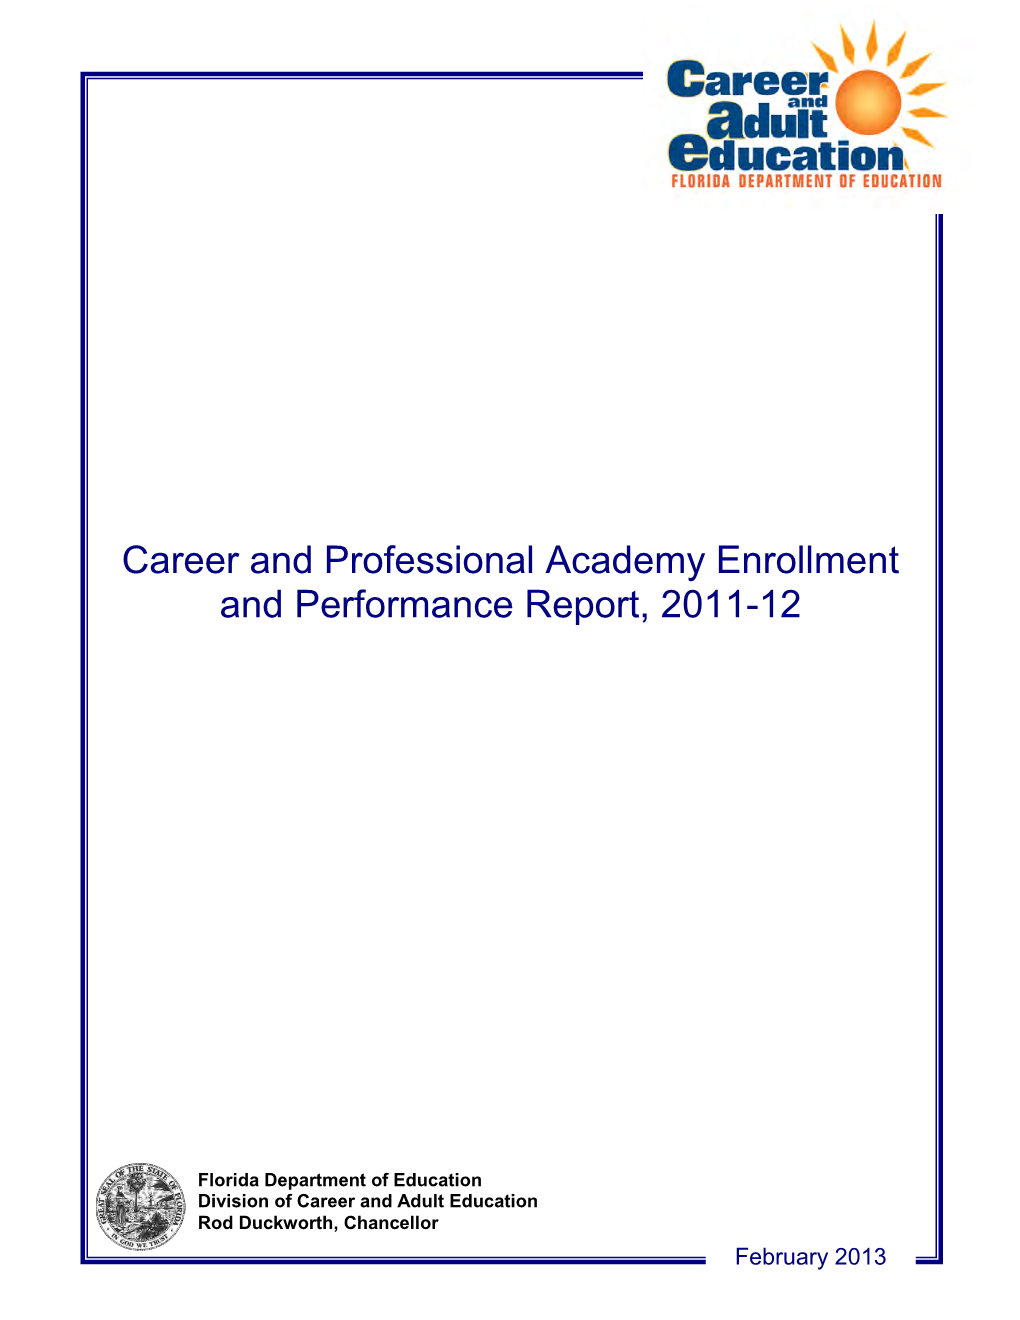 Career and Professional Academy Enrollment and Performance Report, 2011-12